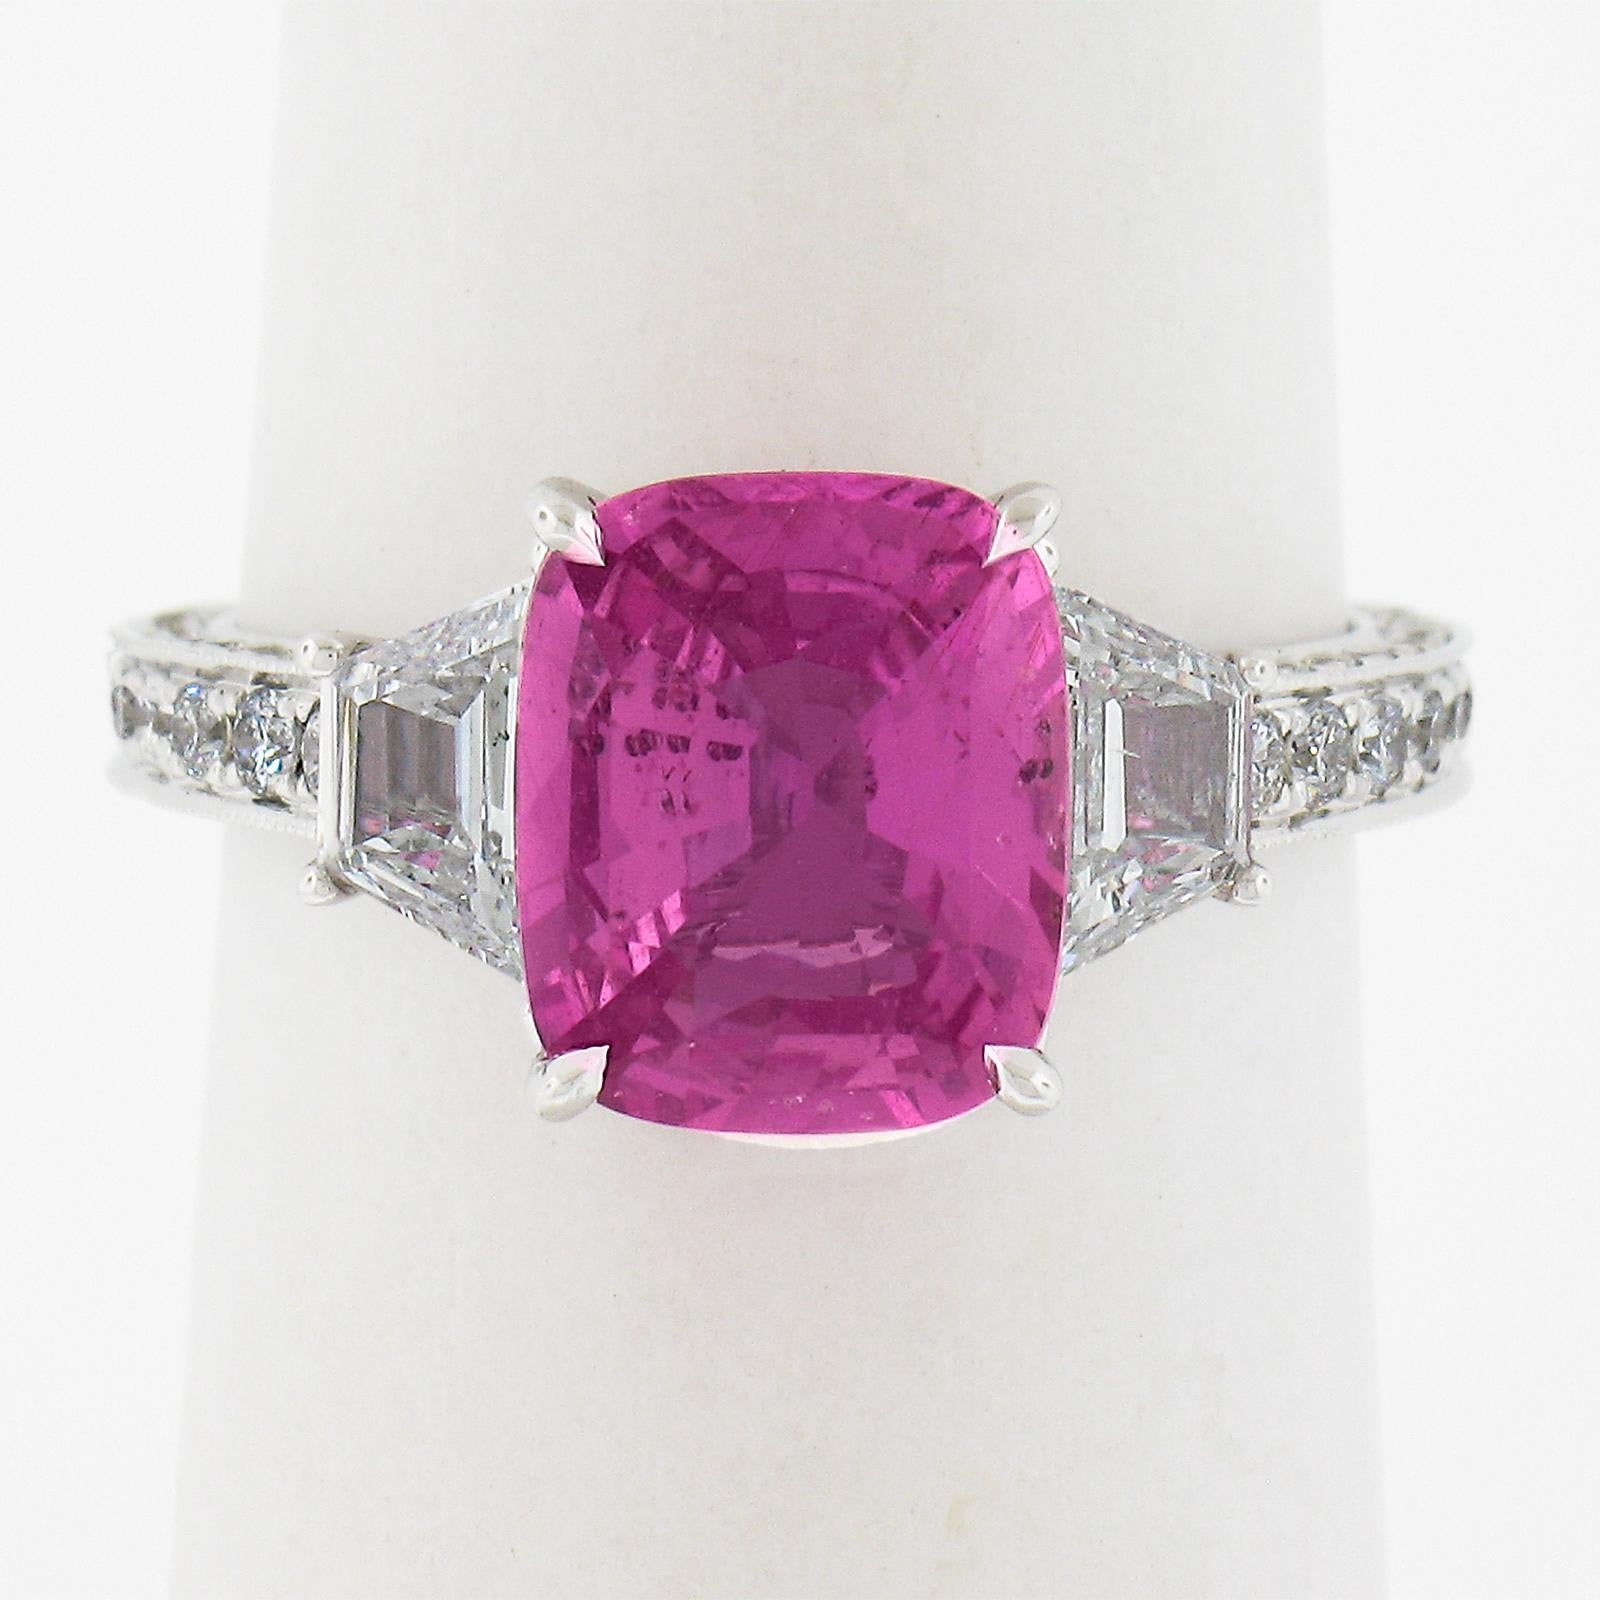 --Stone(s):--
(1) Natural Genuine Sapphire - Cushion Step Cut - Prong Set - Vivid Rich Bubblegum Purplish Pink Color - No Heat - 3.23ct (exact - certified)
** See Certification Details Below for Complete Info **
(2) Natural Genuine Diamonds -